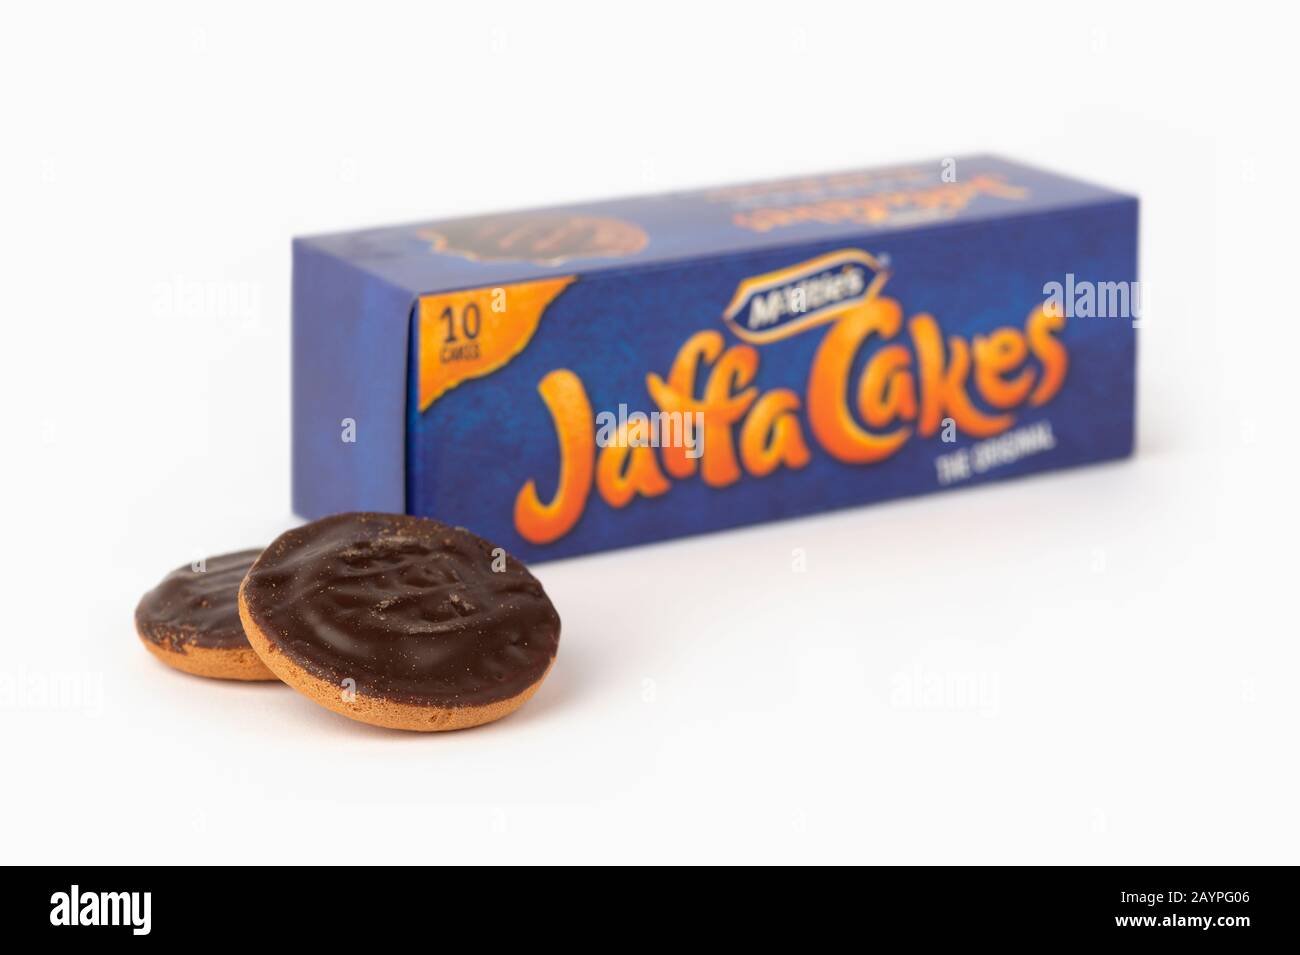 Some McVitie's Jaffa Cakes shot on a white background along with the product's box packaging. Stock Photo